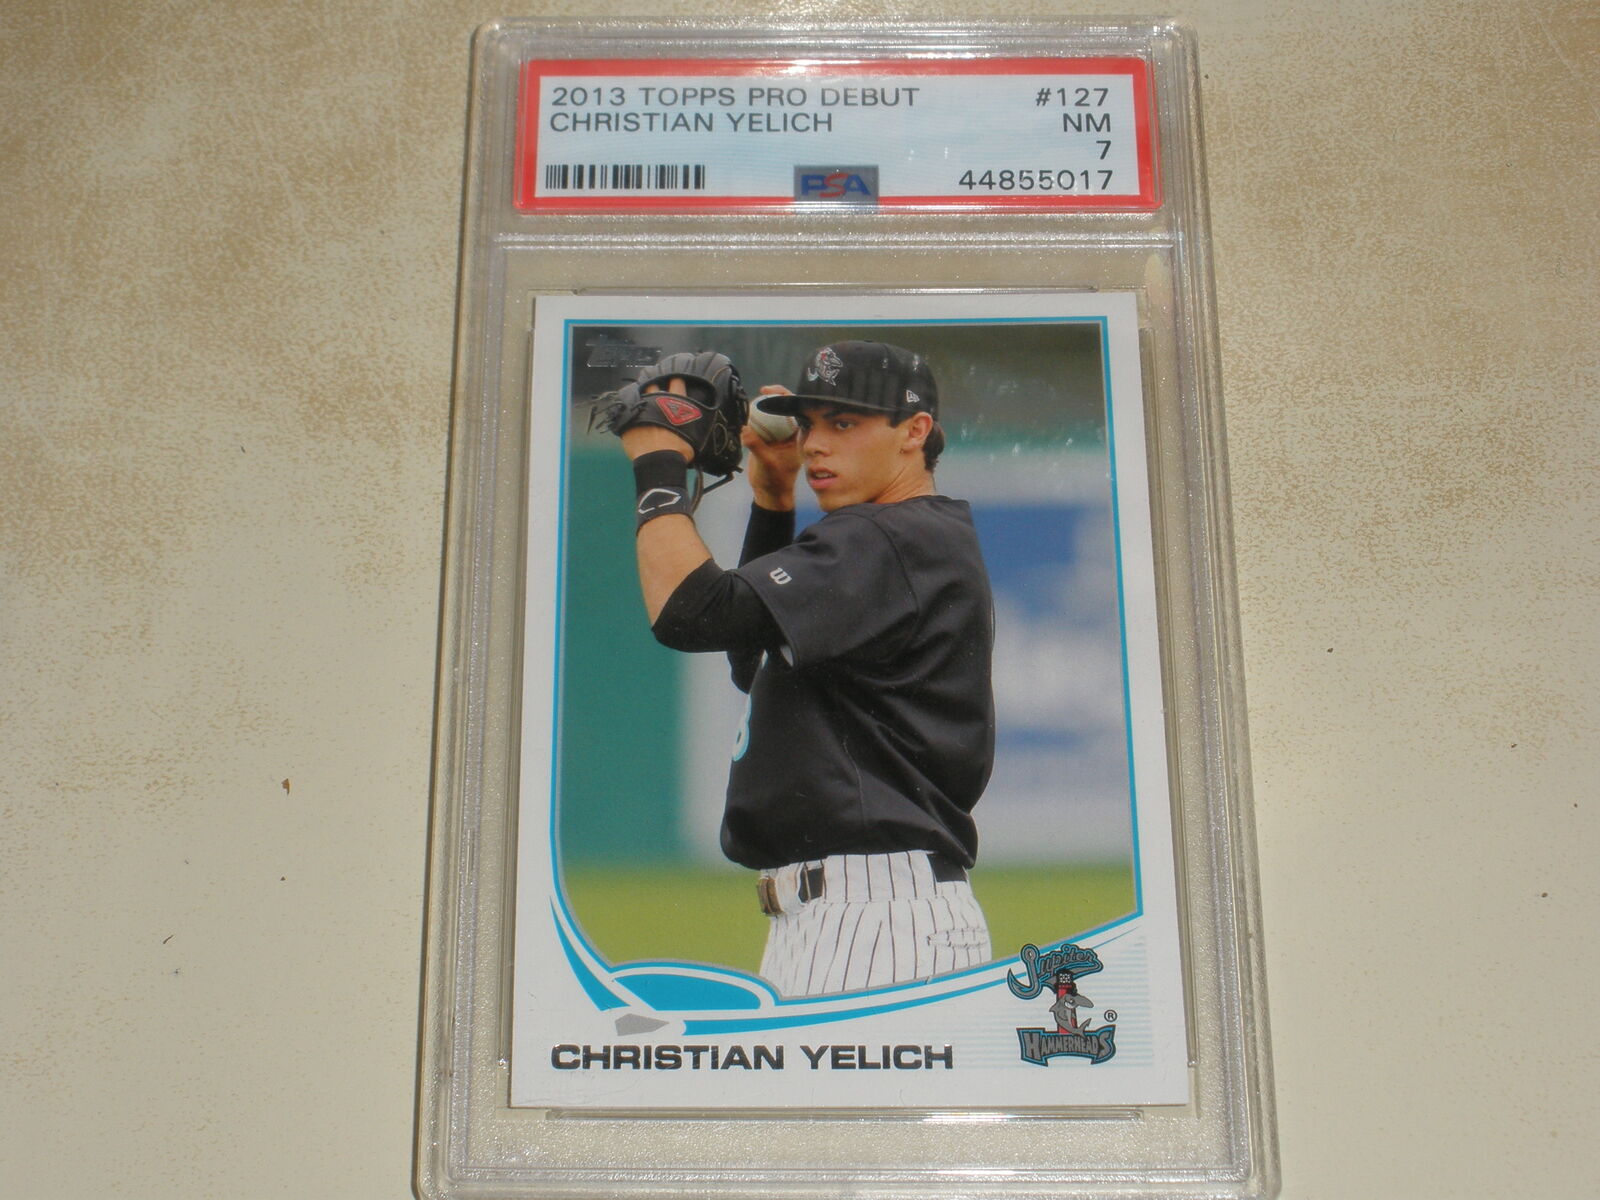 2013 Topps Pro Debut #127 Christian Yelich RC PSA 7